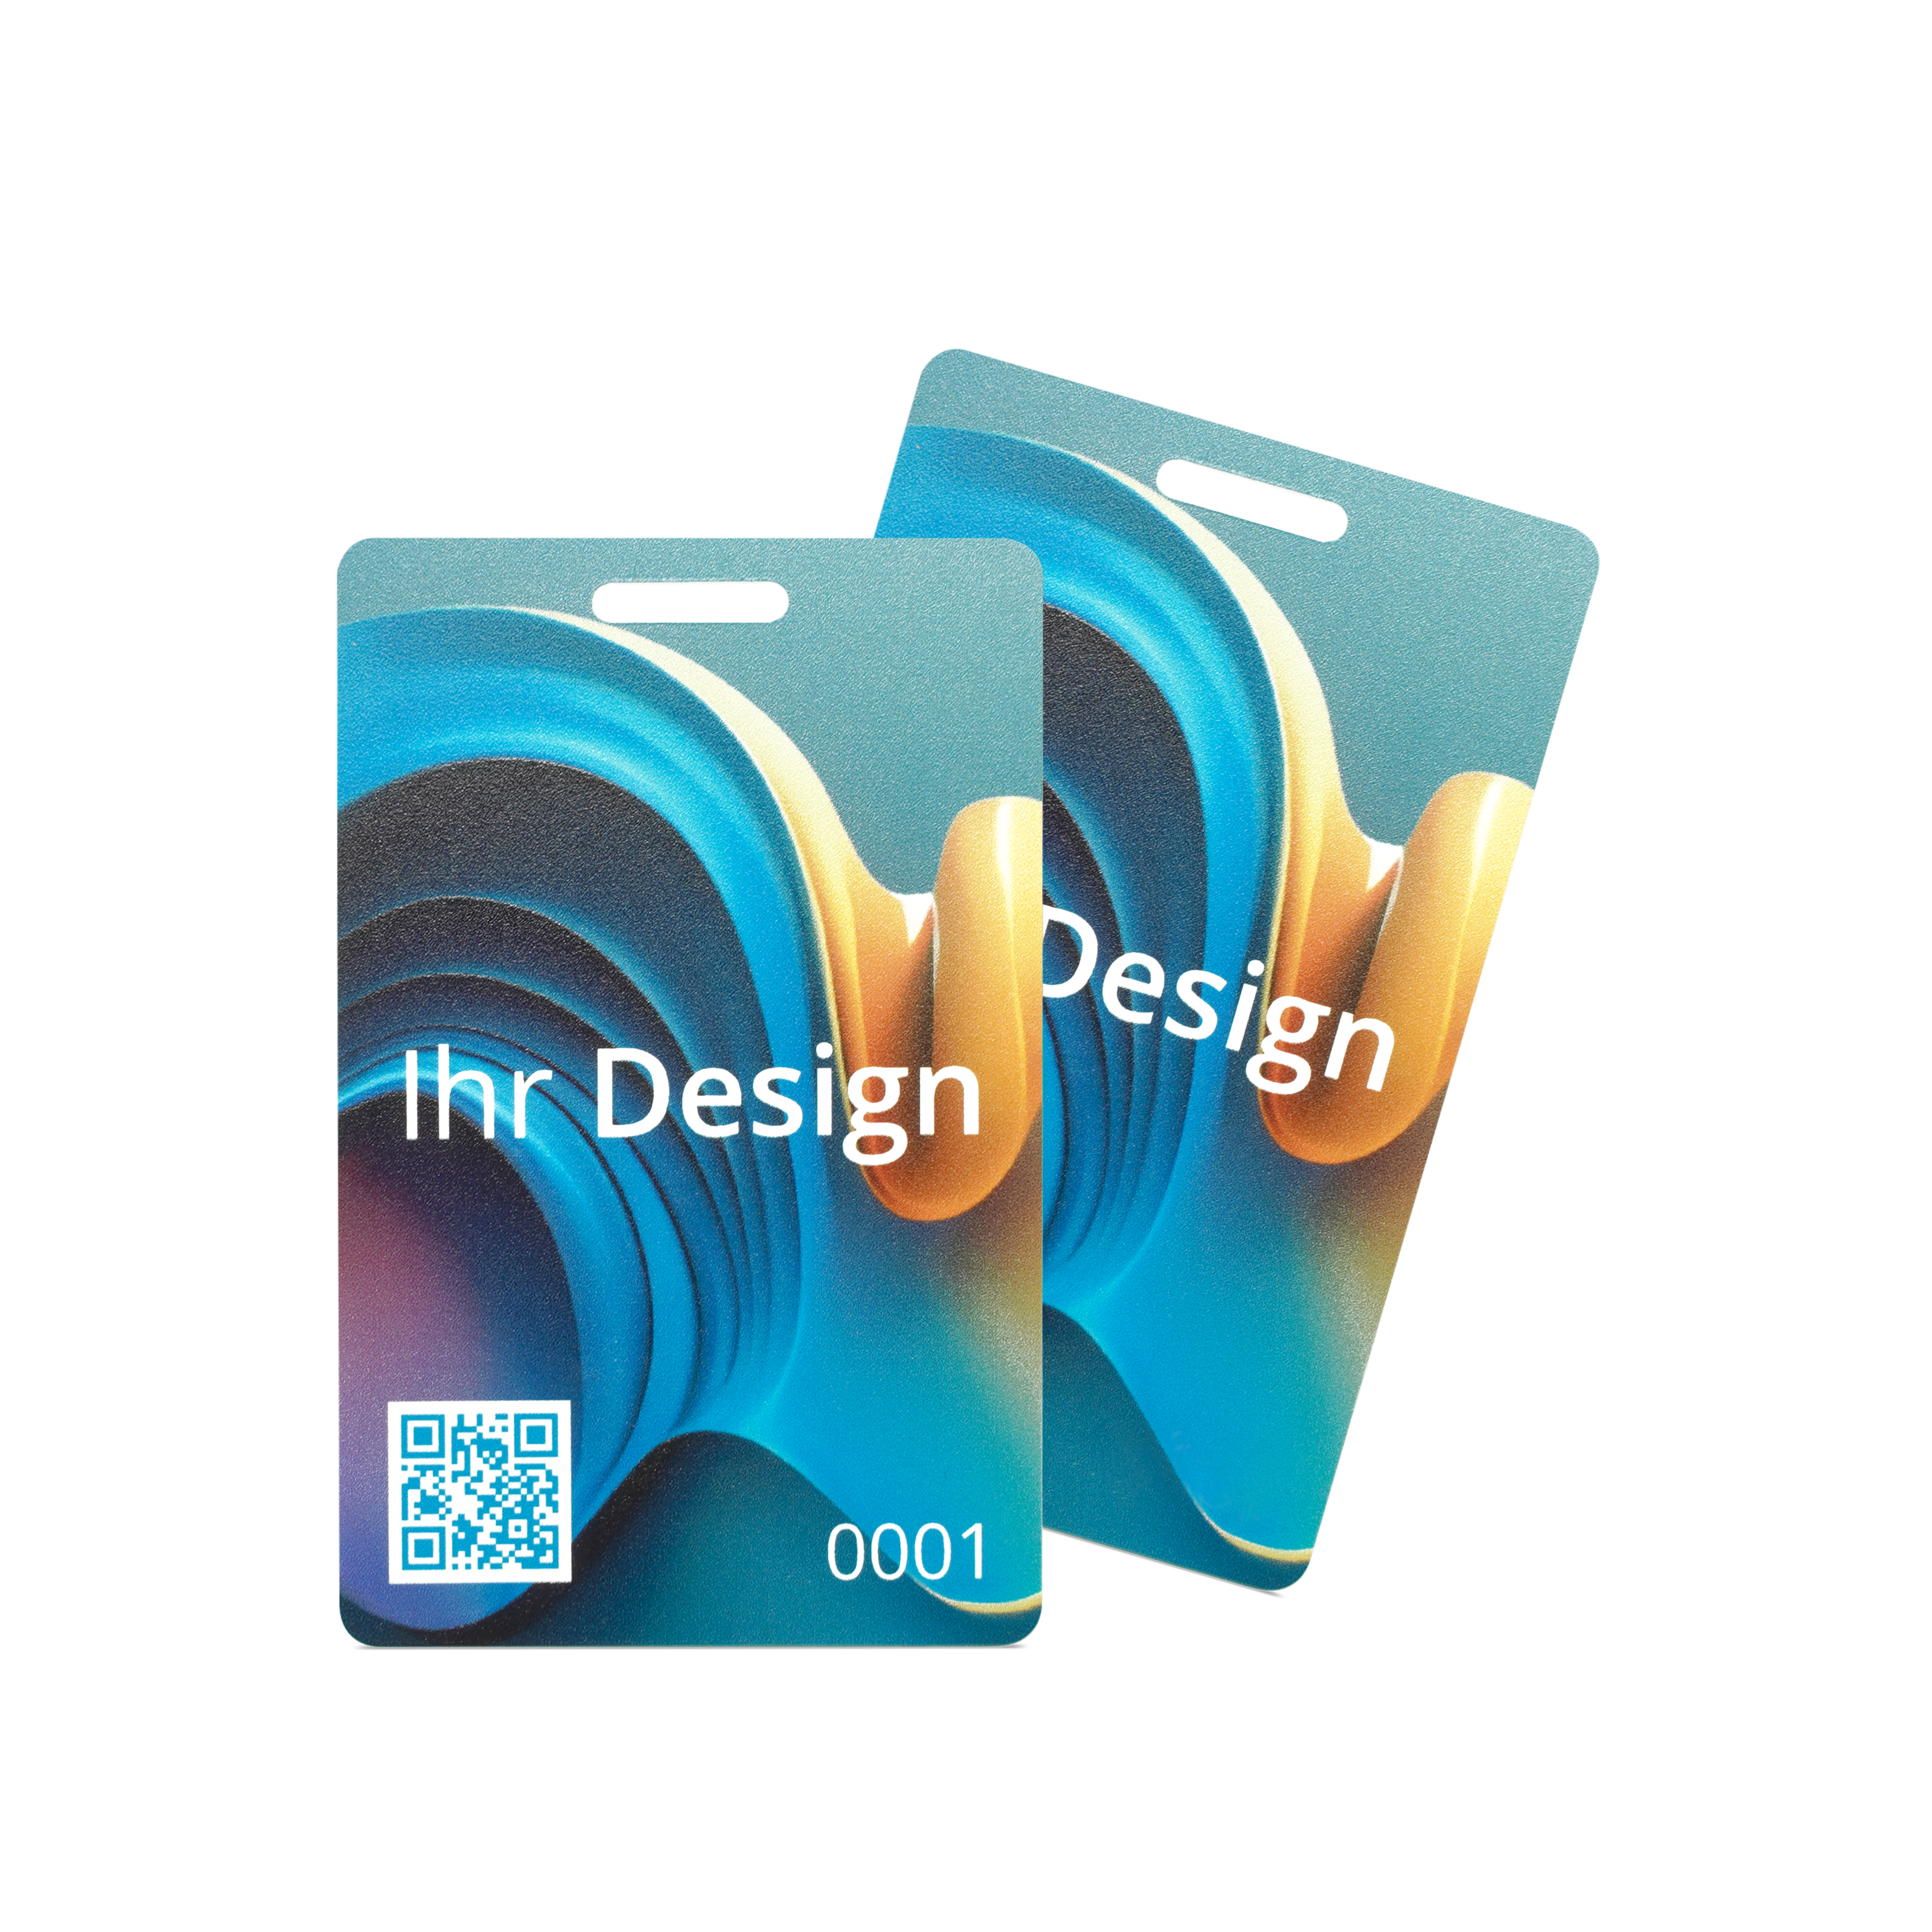 NFC card PVC printed on both sides - 85,6 x 54 mm - NTAG216 - 924 Byte - white glossy - portrait with slot